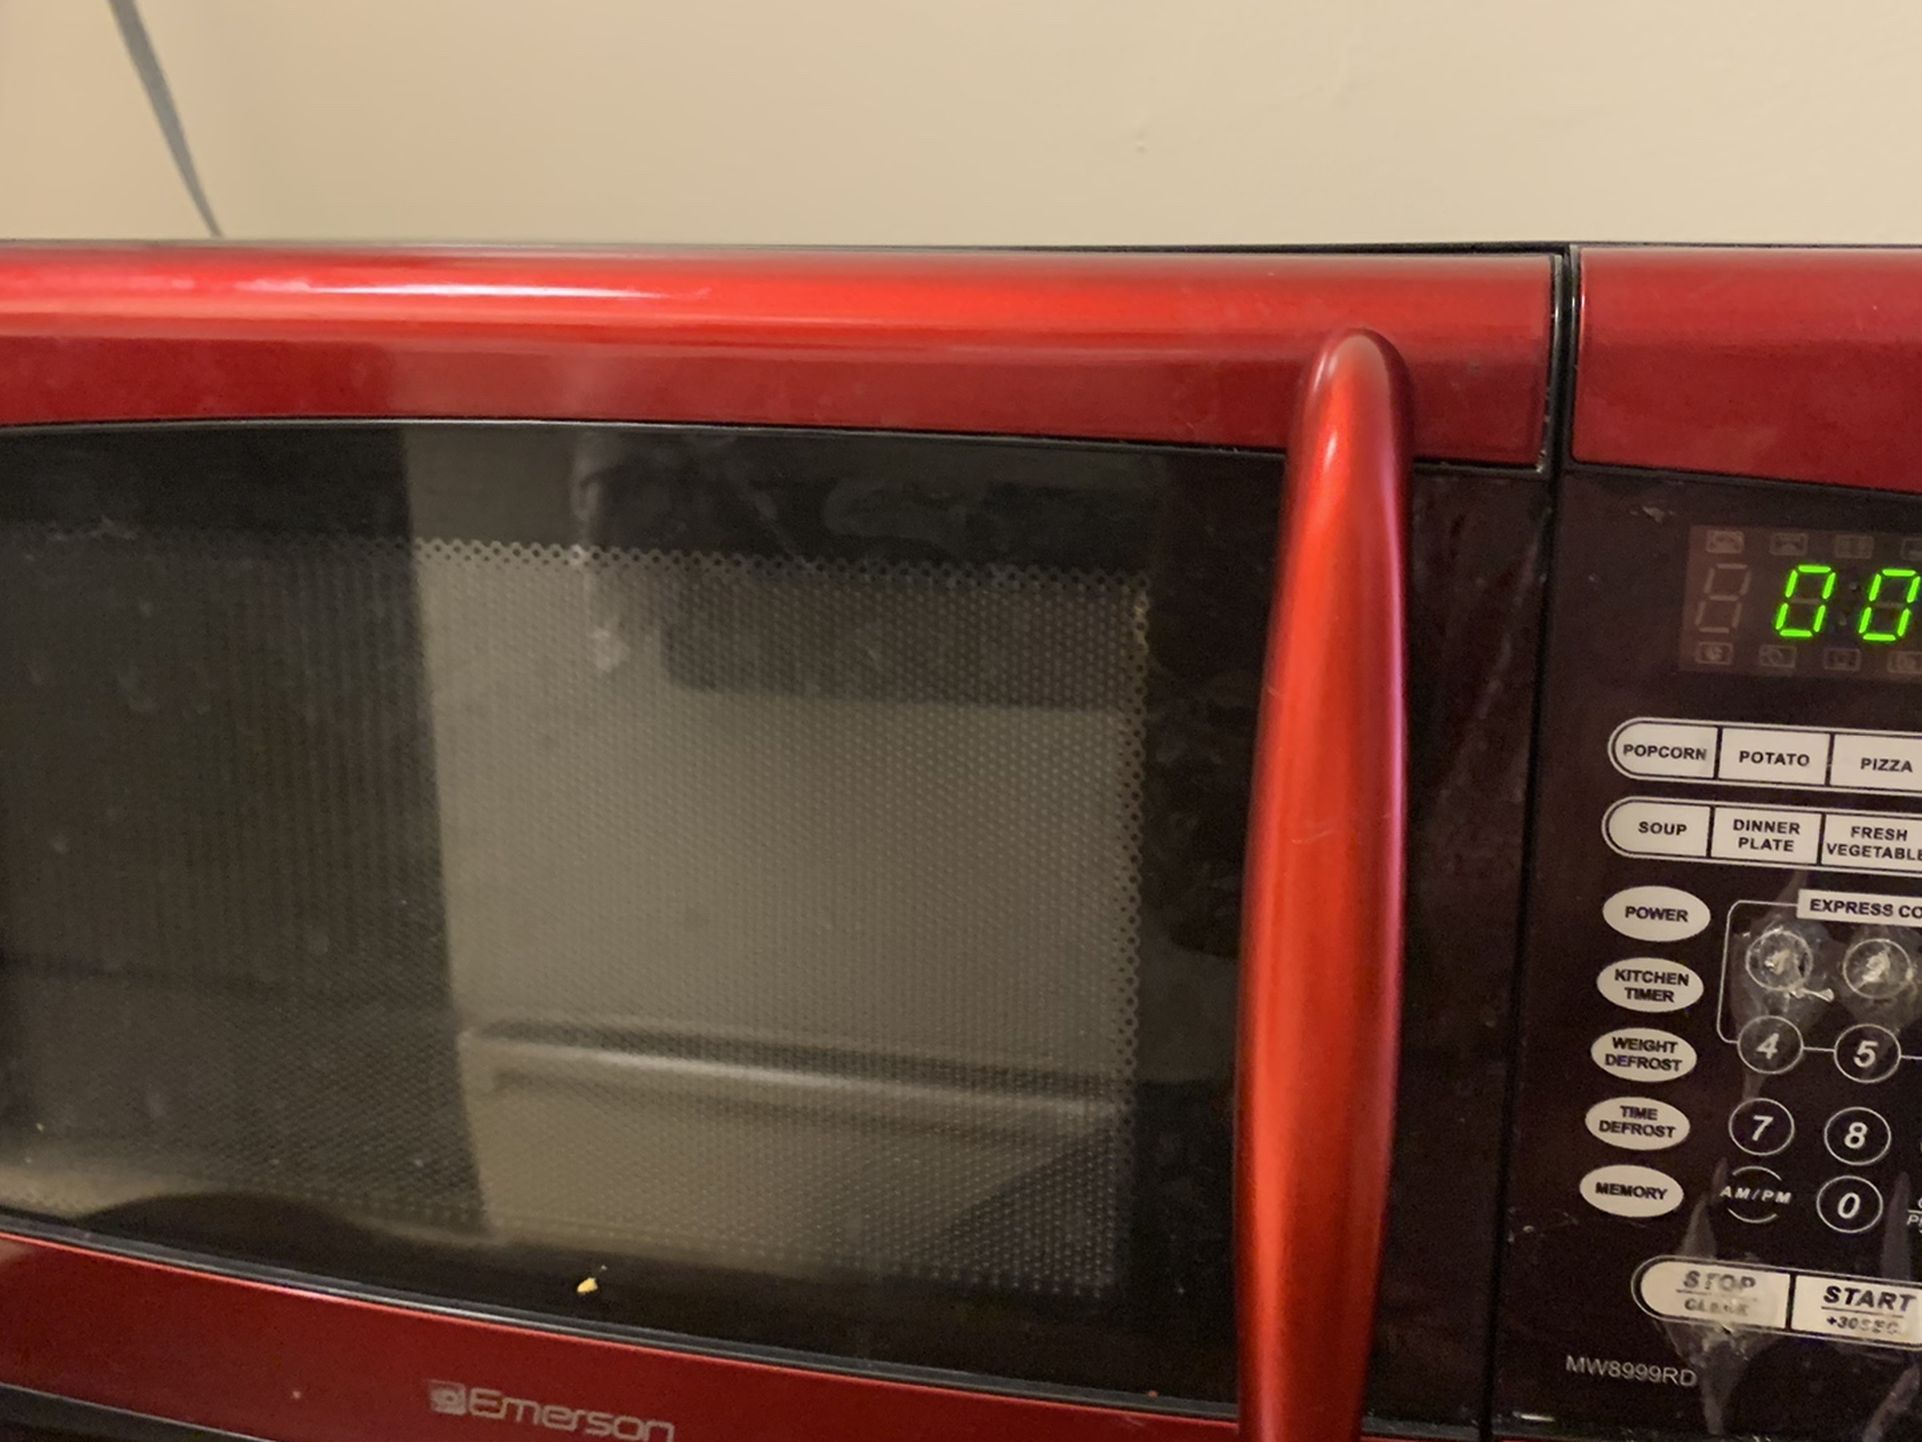 Emerson Microwave Good Condition -$10 Only